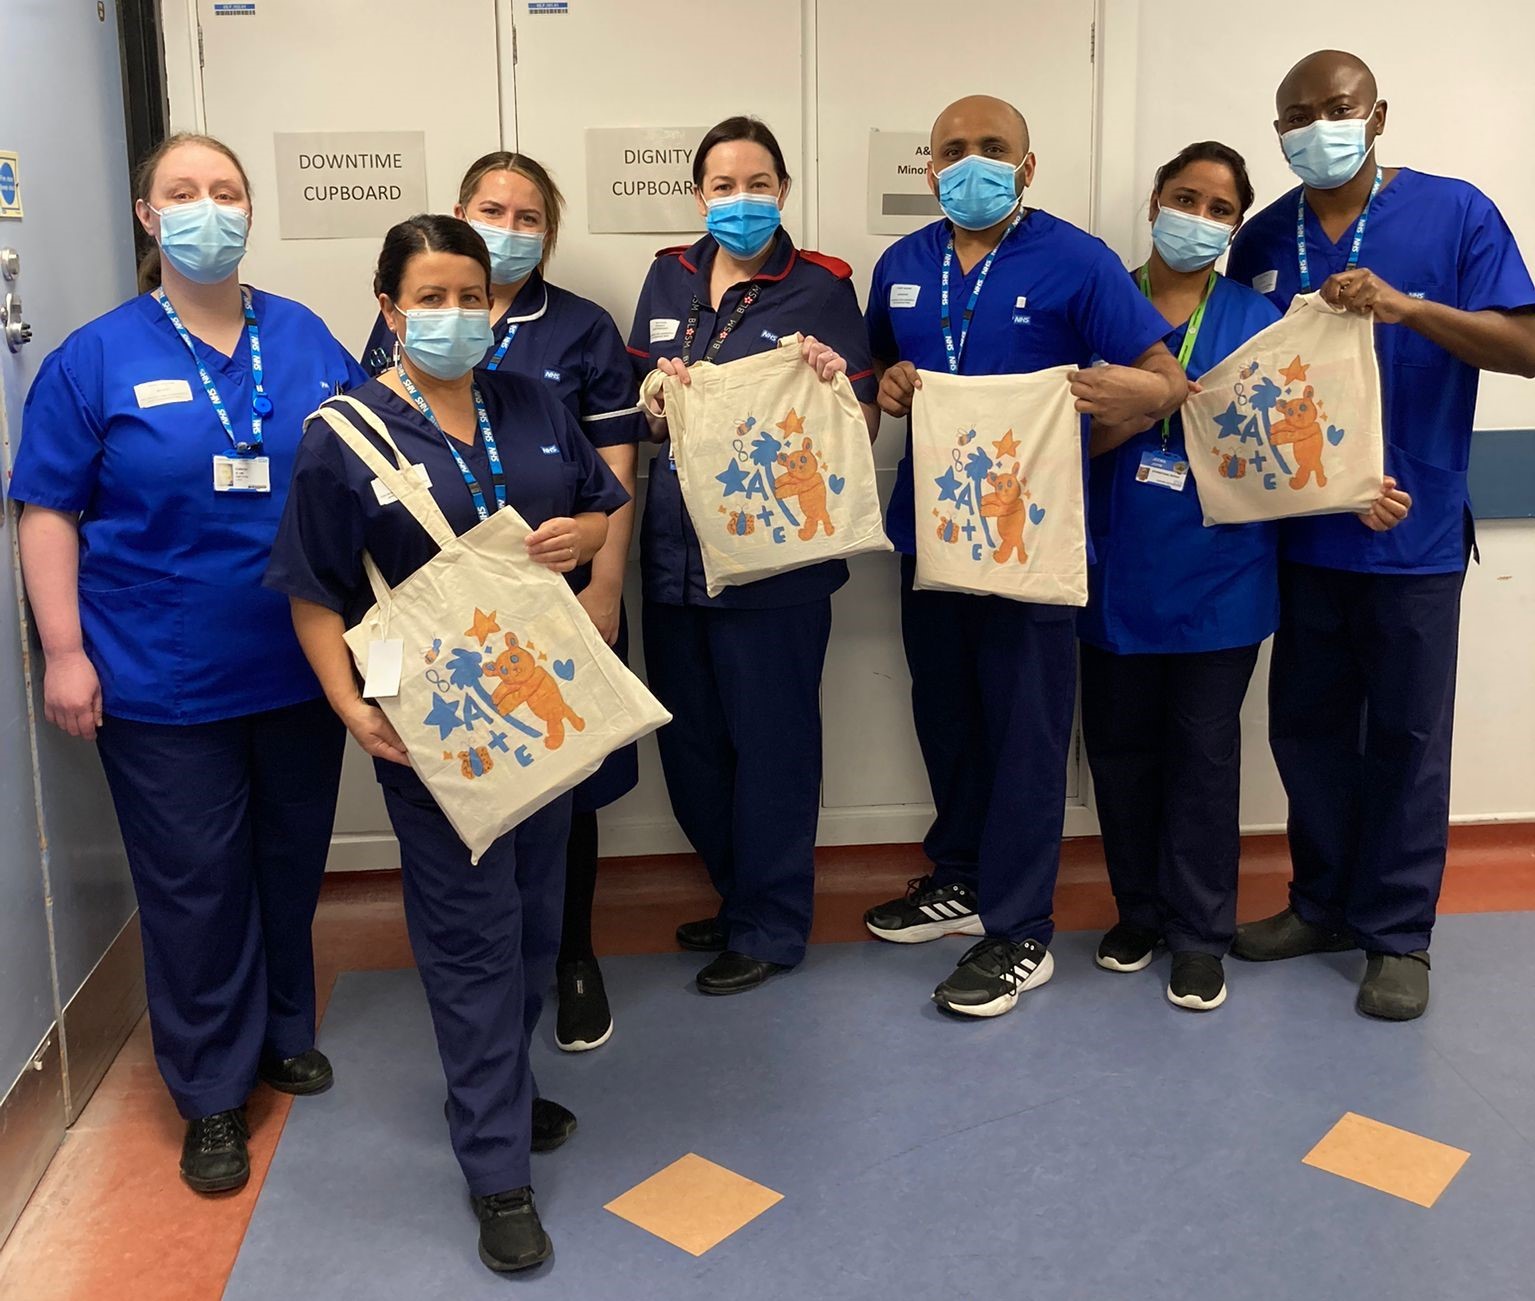 Some of our A&E Team with the Care Bags